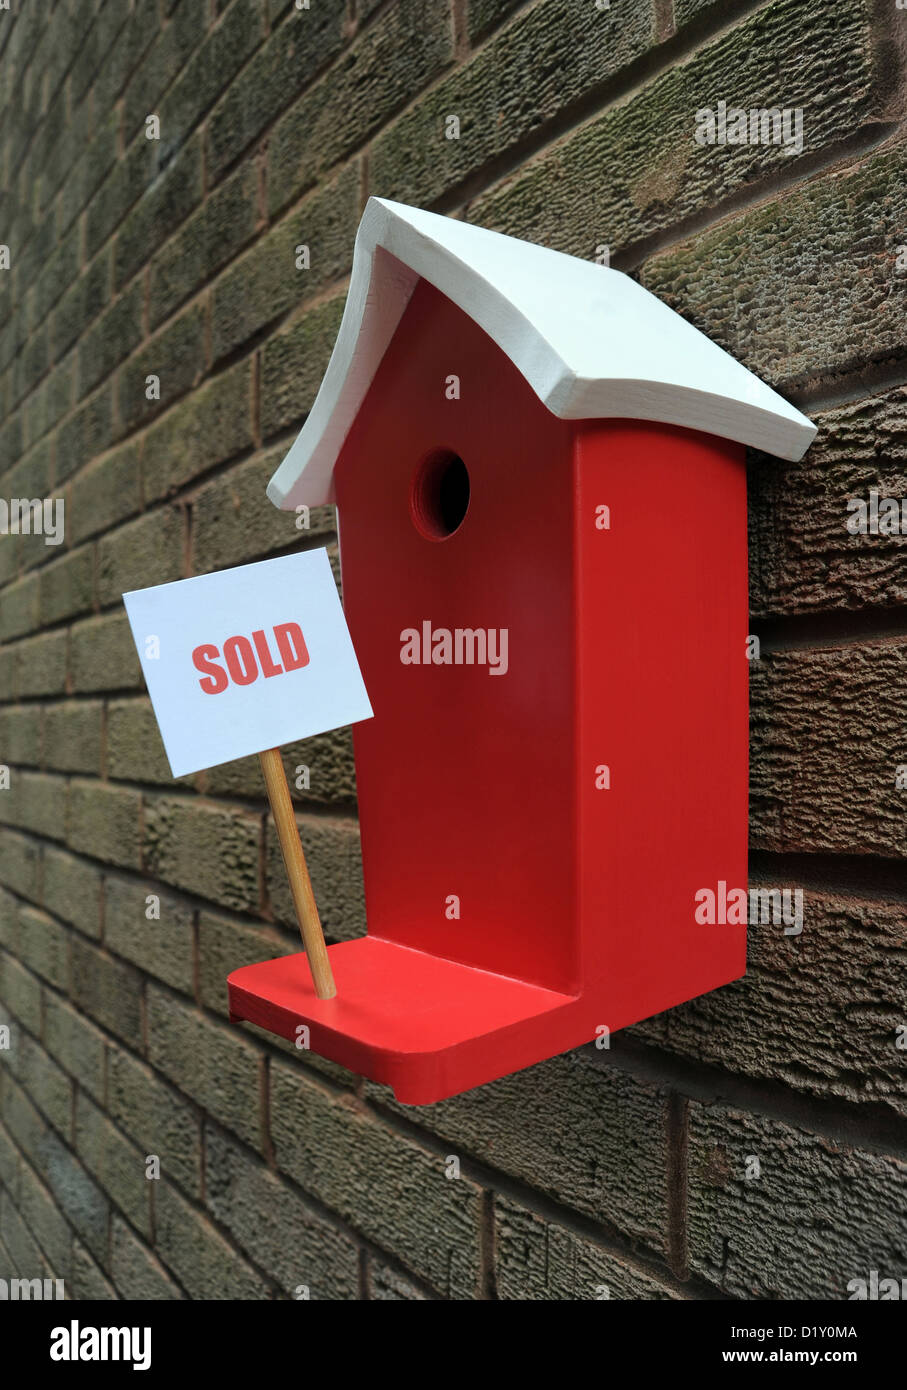 WALL MOUNTED BIRD BOX HOUSE WITH SOLD SIGN RE MOVING HOUSE MORTGAGES LOANS PRICES COSTS BUYING BUYERS THE ECONOMY SELLING LET UK Stock Photo